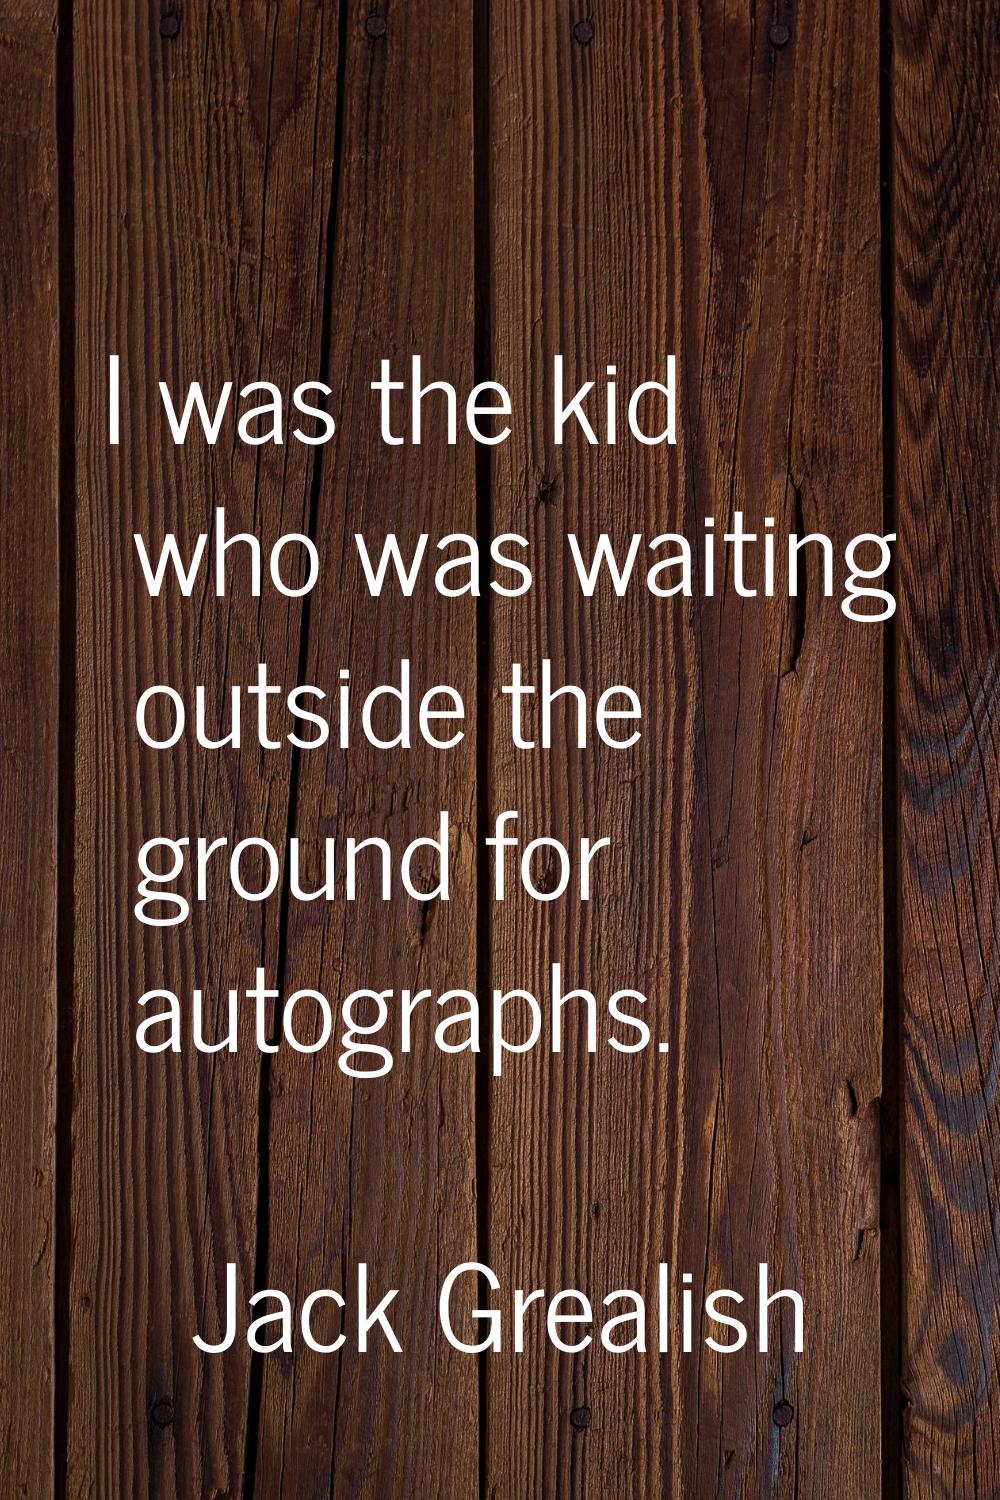 I was the kid who was waiting outside the ground for autographs.